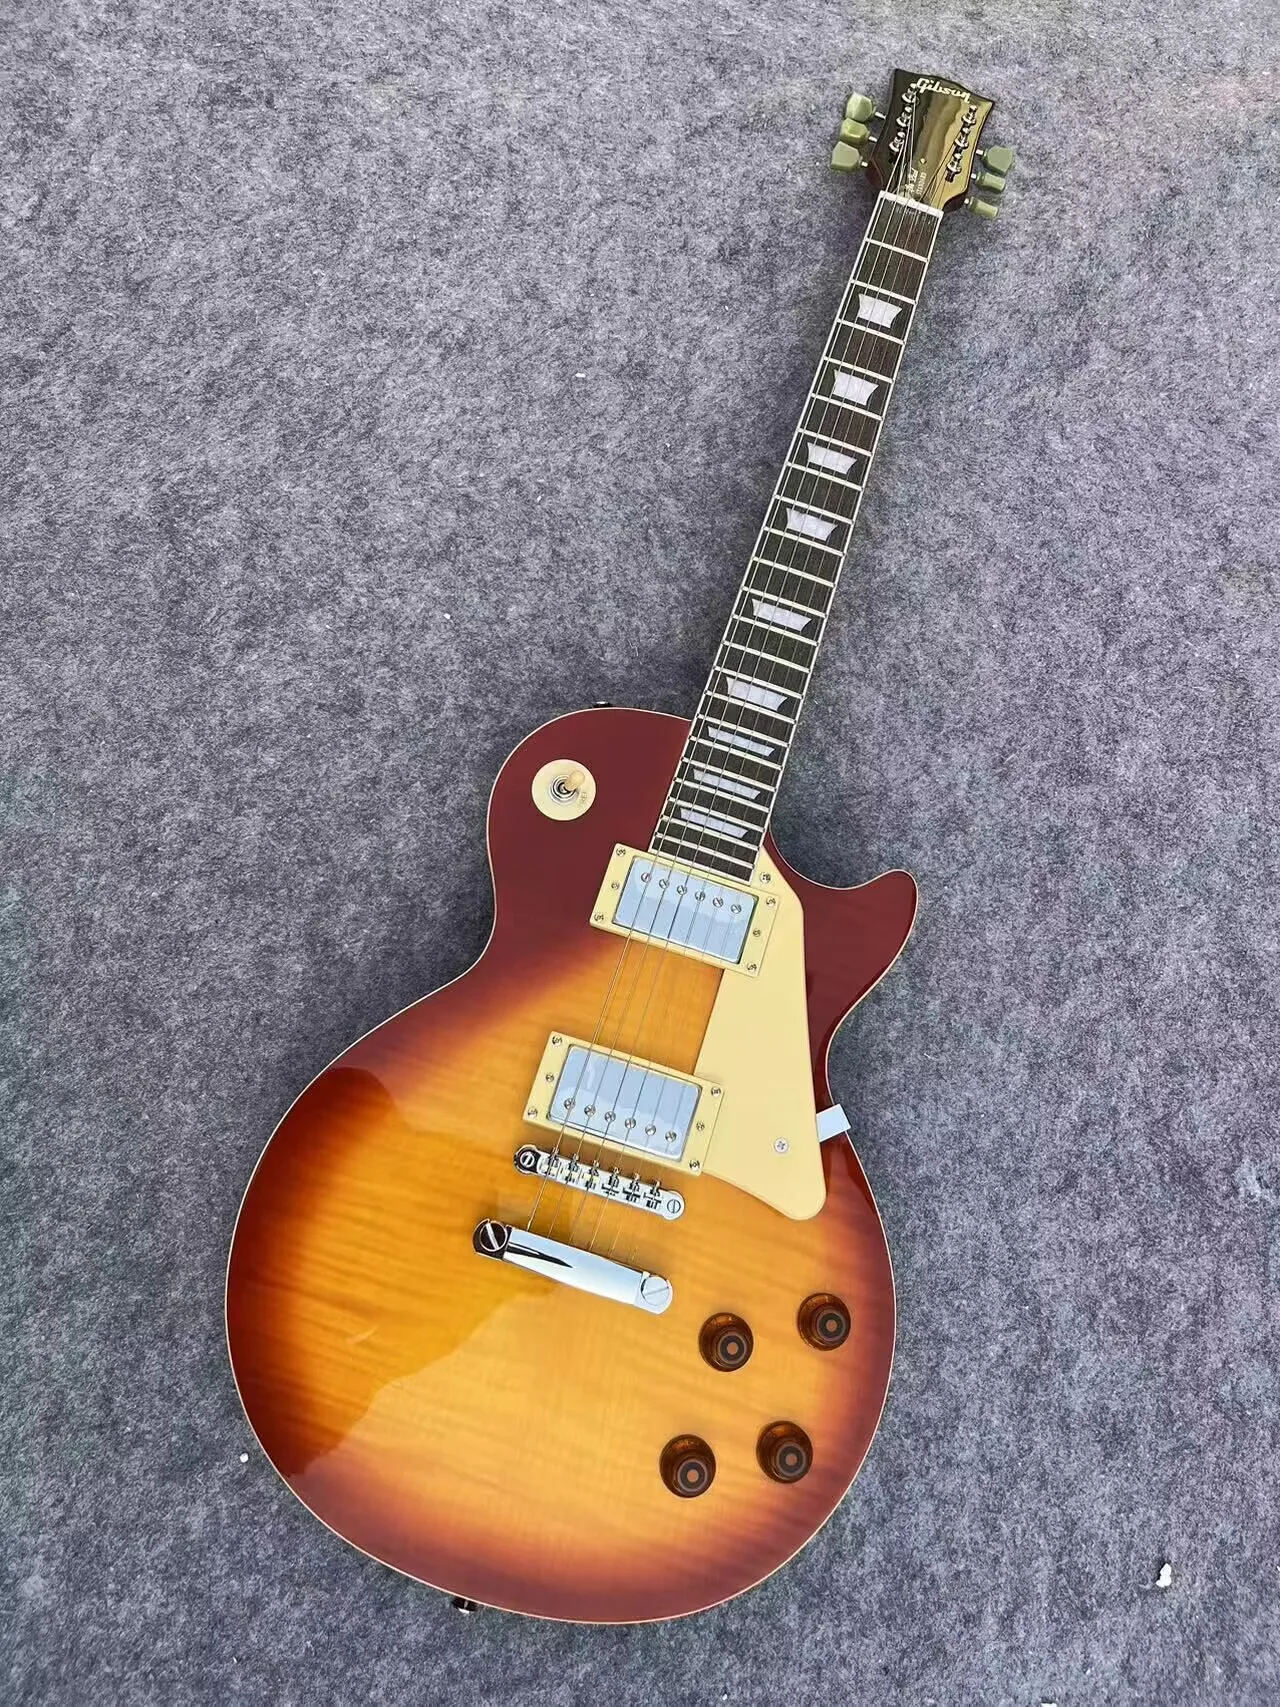 

Send in 3 days Flame Maple Top G Les Standard Brown LP Paul Electric Guitar in stock GUKWQ